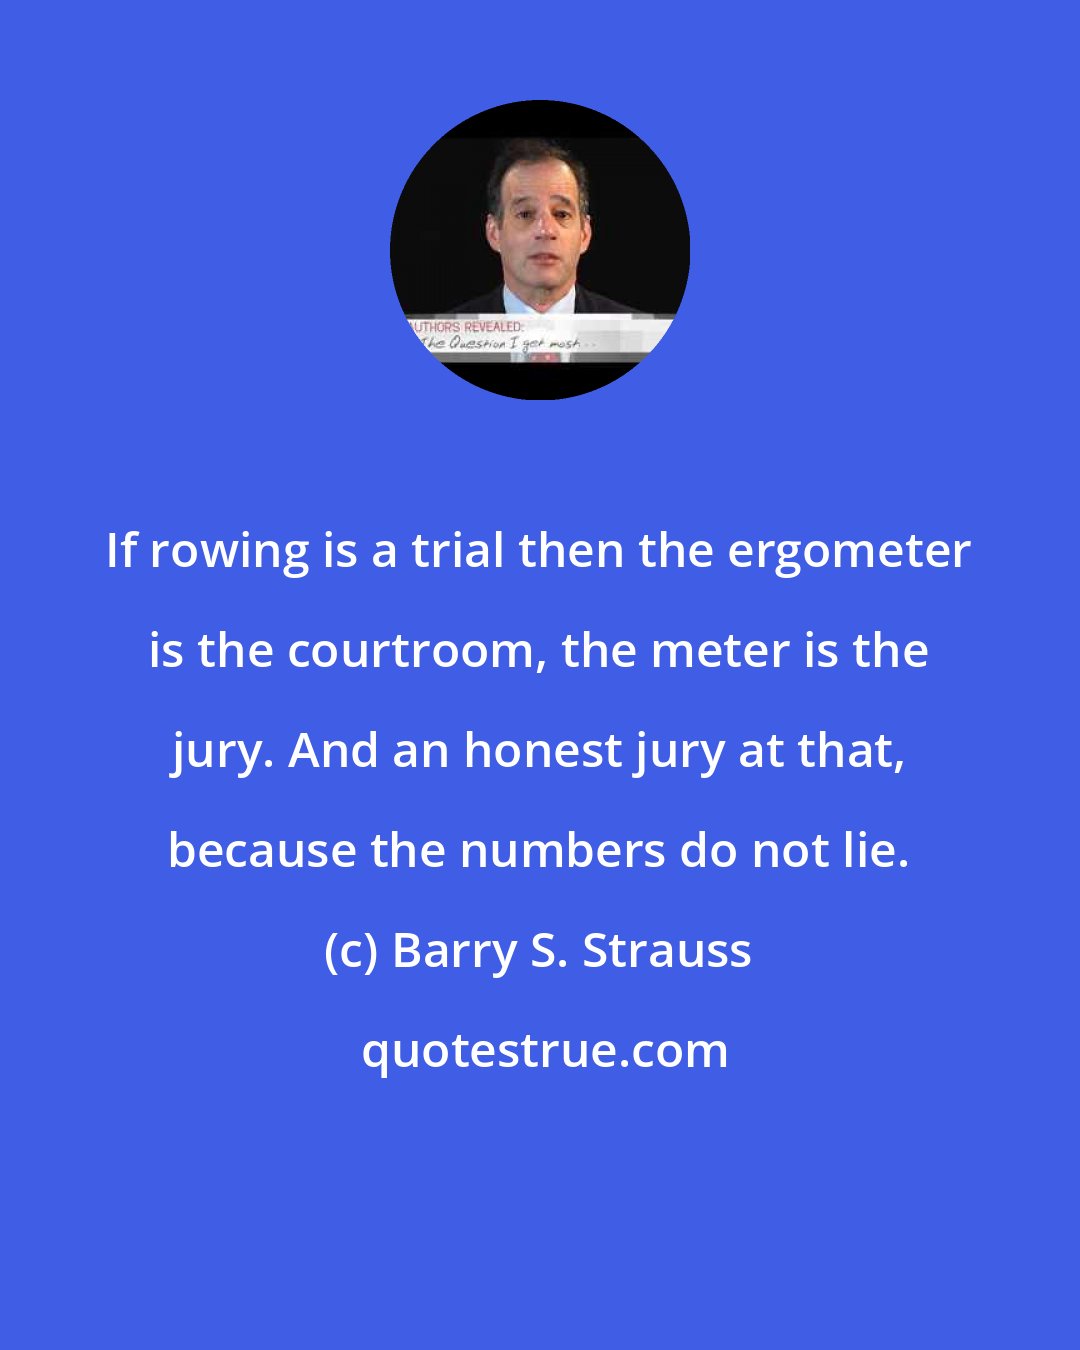 Barry S. Strauss: If rowing is a trial then the ergometer is the courtroom, the meter is the jury. And an honest jury at that, because the numbers do not lie.